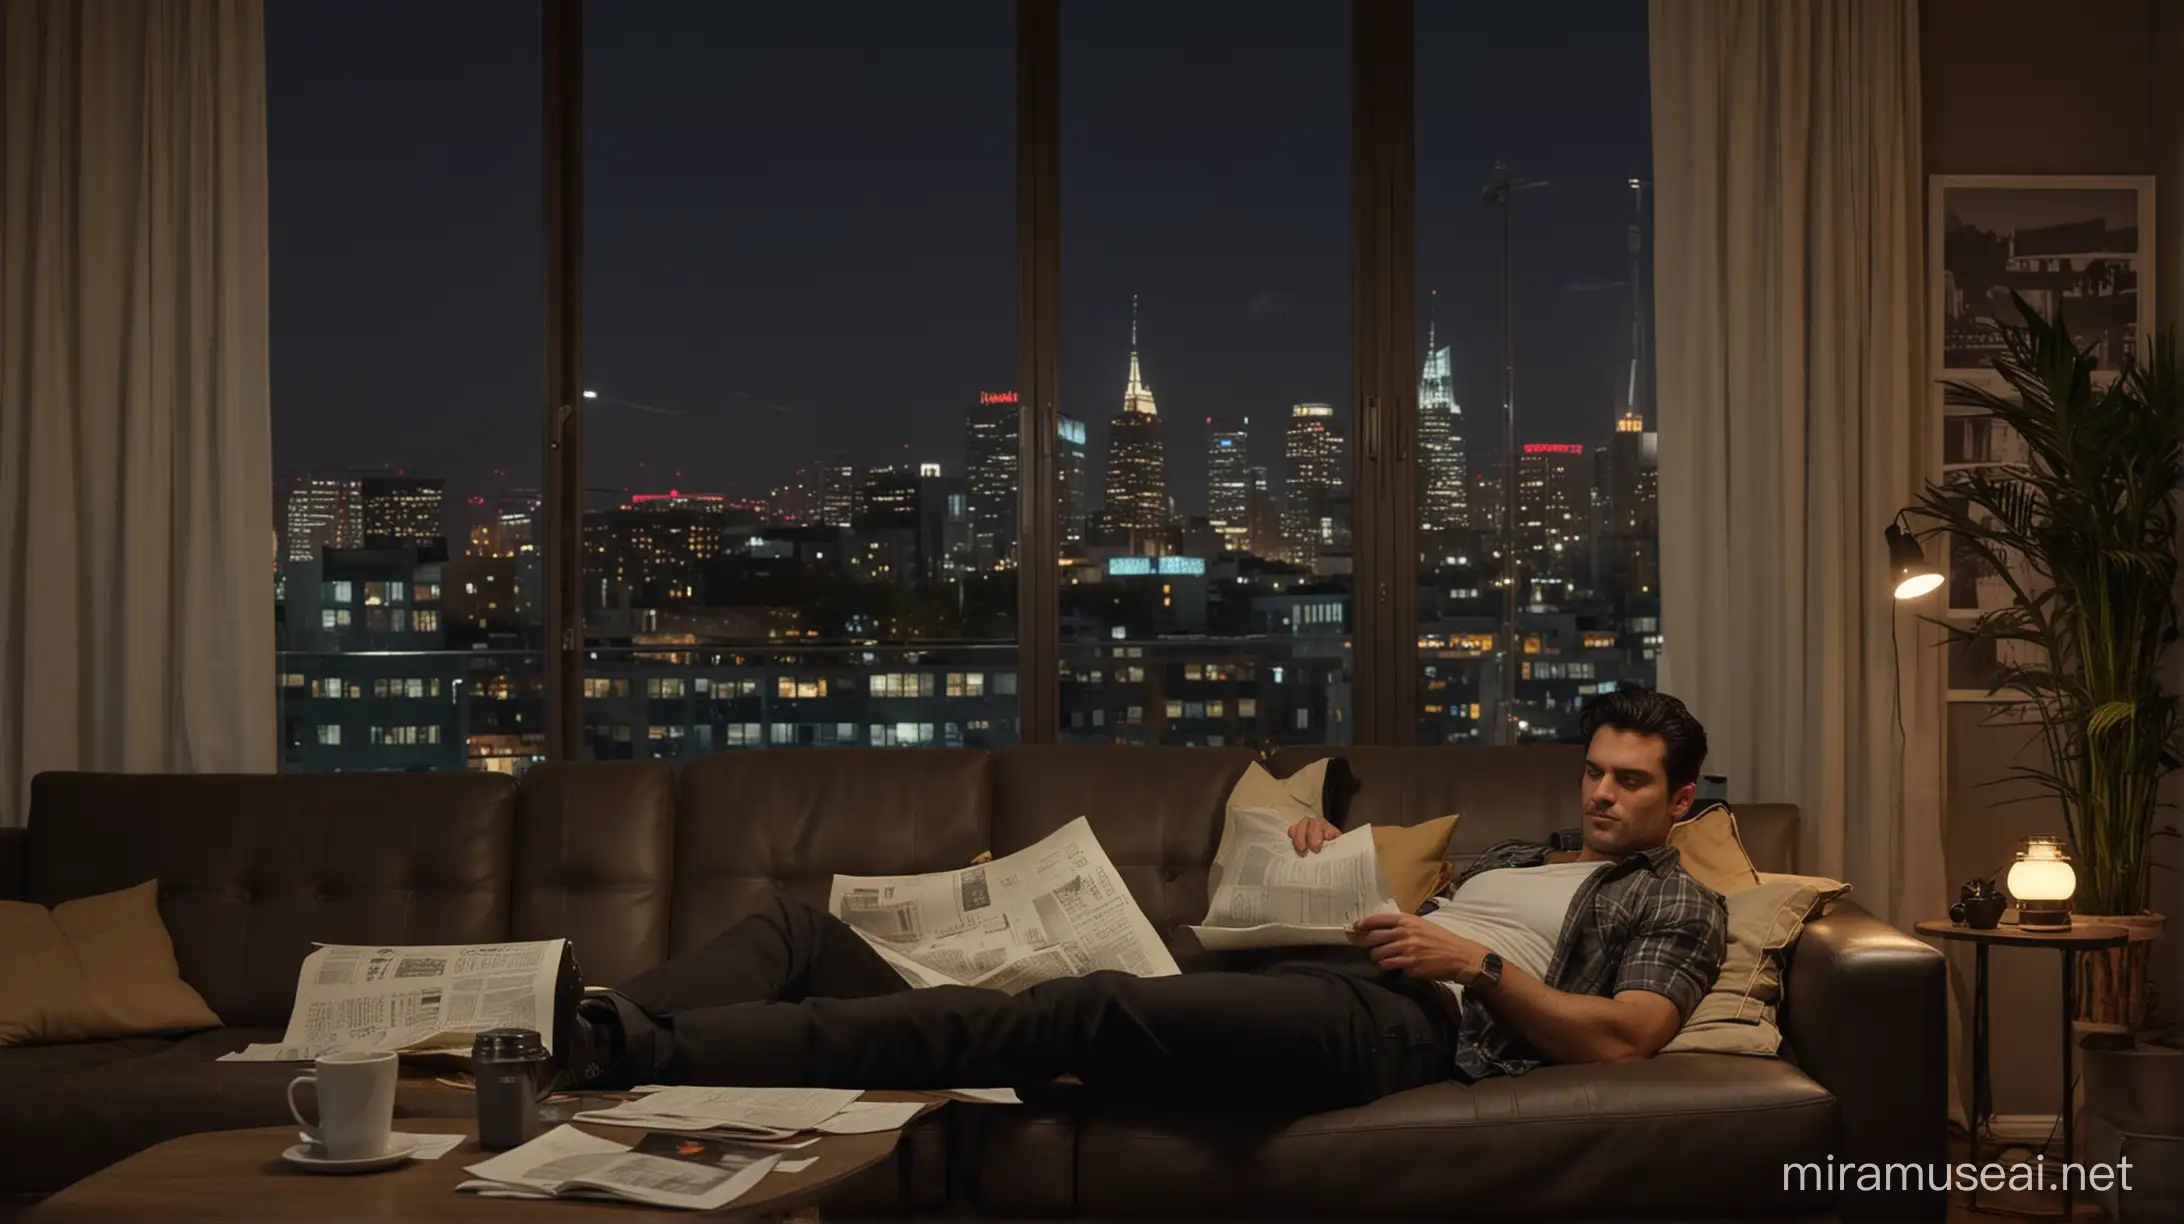 wide shot, dark, dimmly lit retro living room at night time, rugged looking muscly handsome man with black hair wearing trousers and shirt, fast asleep laying on midcentury sofa, with paper work on coffee table next to him, large window in background with neon city outside, relaxing, nighttime